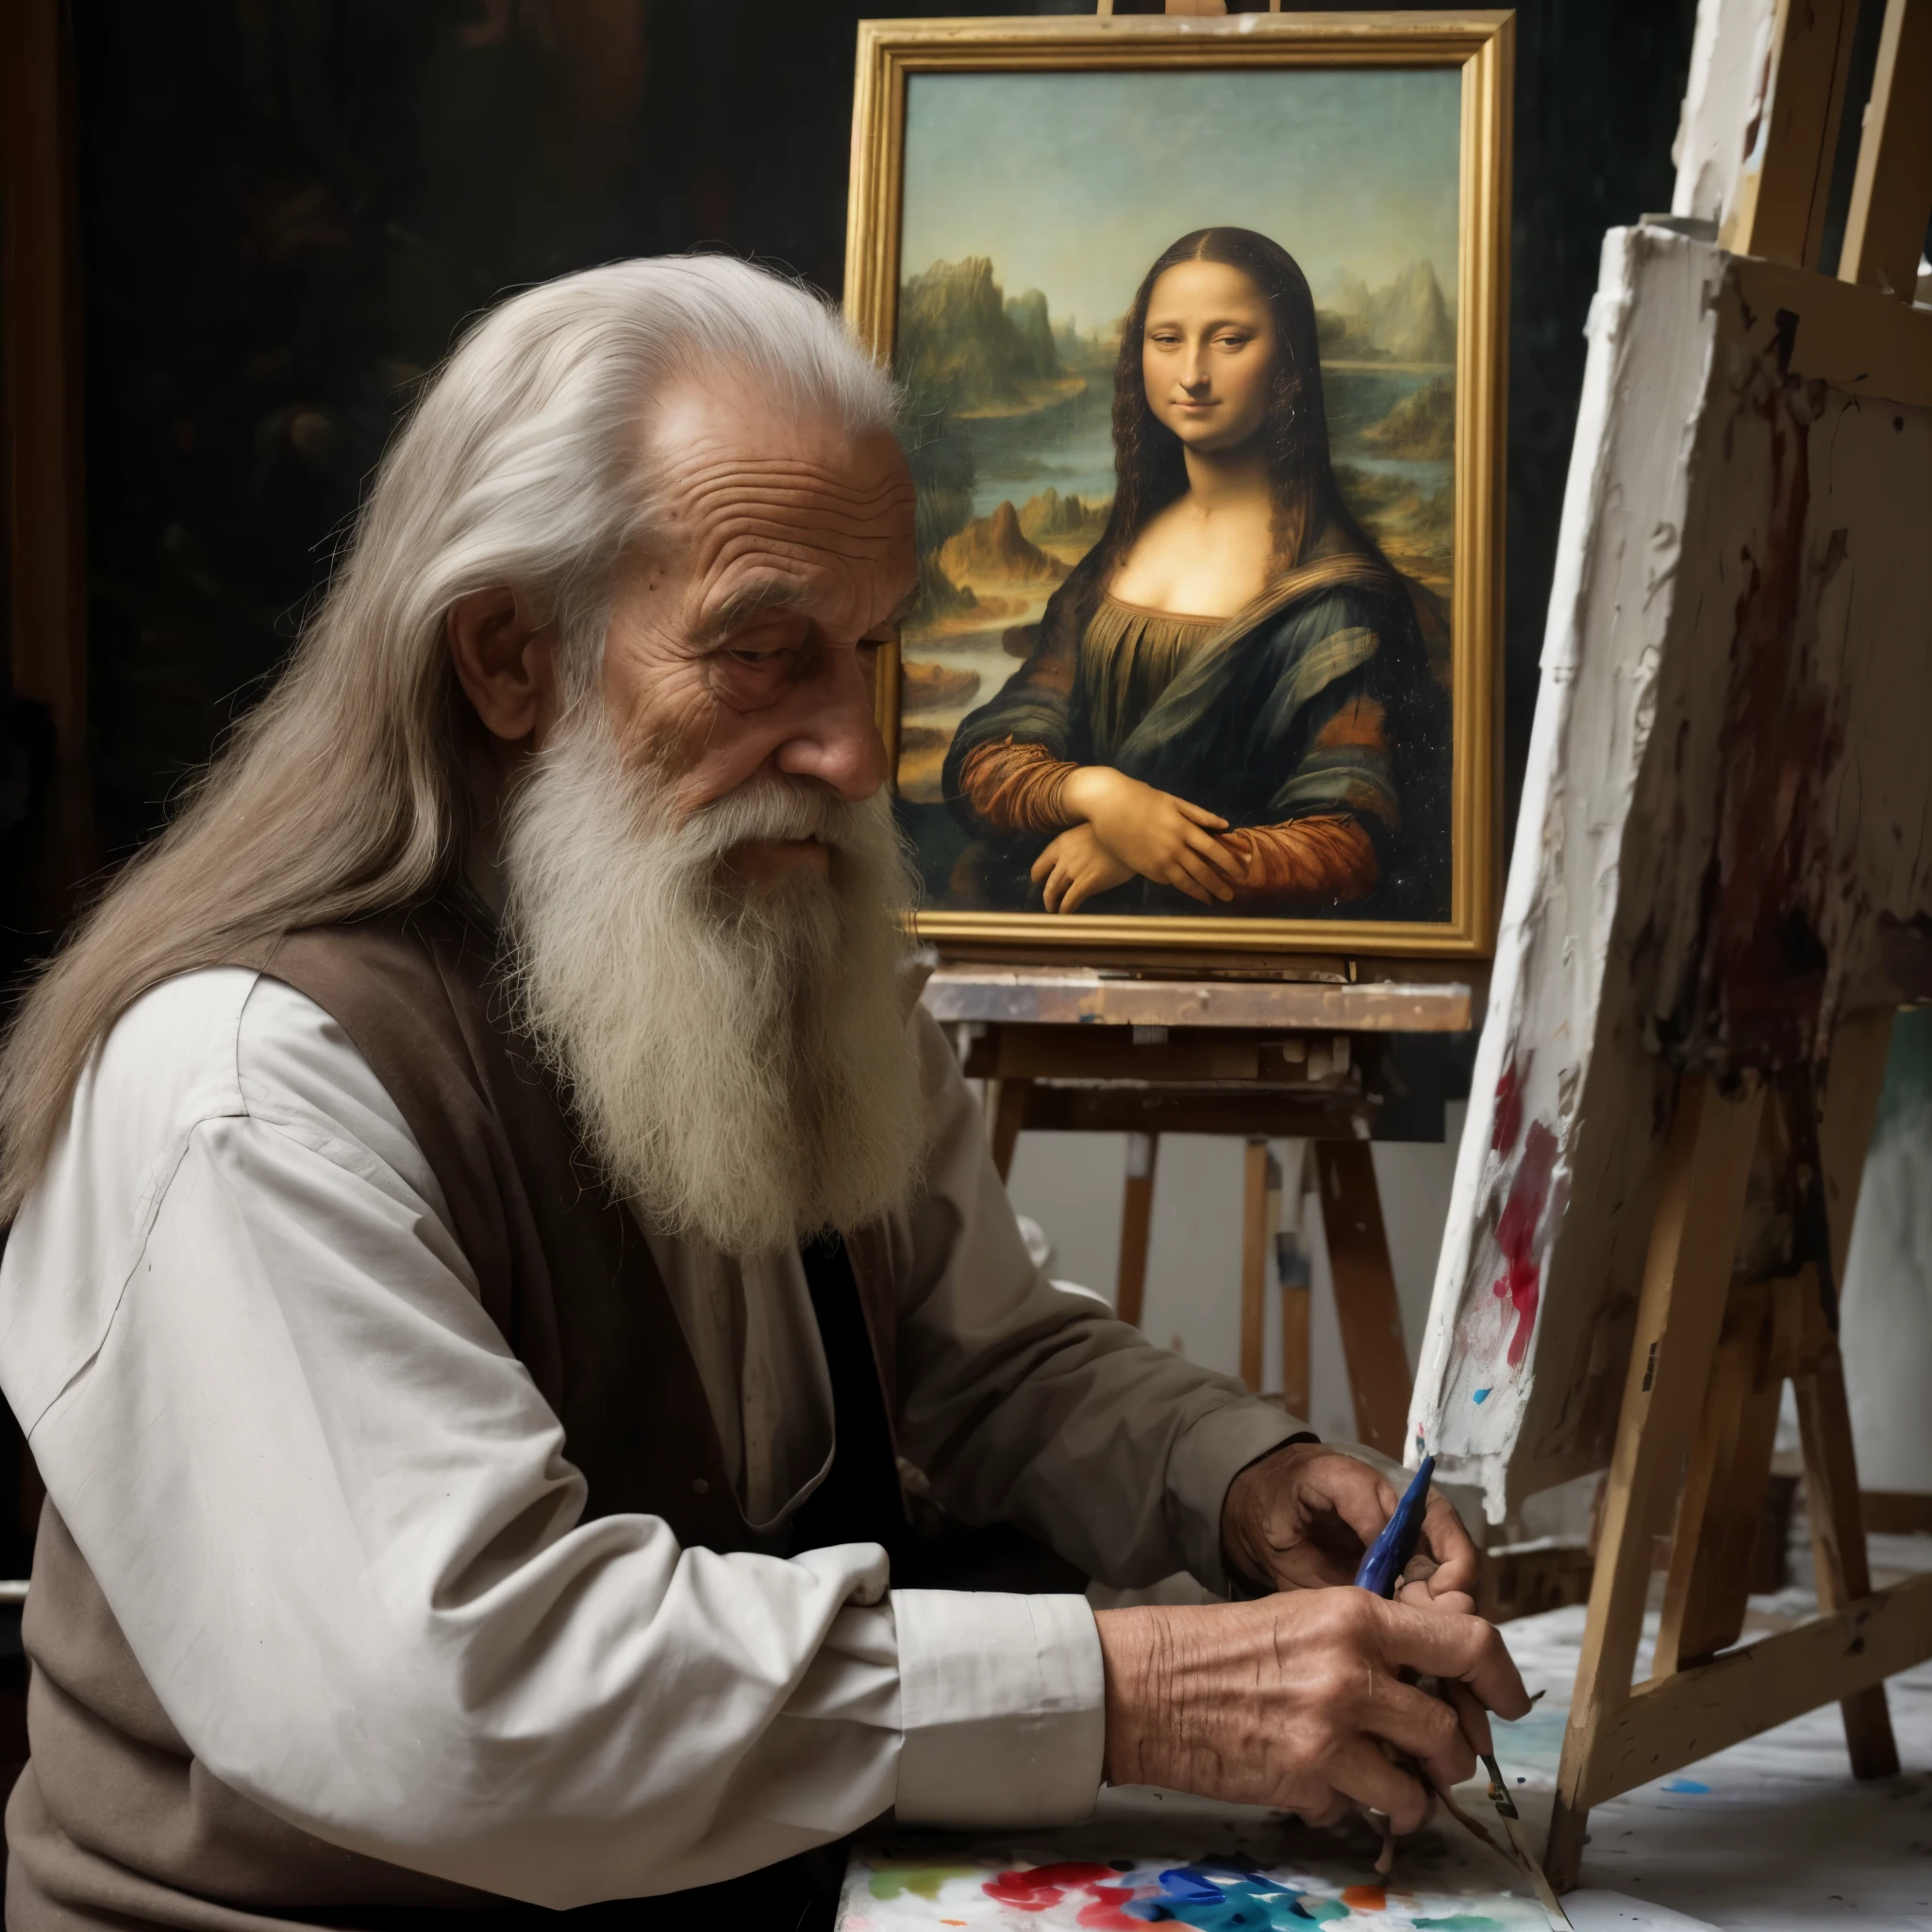 Side view. Elderly man as Leonardo da Vinci, long hair and beard, sitting at the table and painting a portrait of Mona Lisa. Focused on the painting. Clothes stained with paint stains. The painting is small without a frame, on a small easel, standing on a table. Next to it there is a palette, paints in small ceramic bowls, a table covered in paint, dark interior of a painting studio, dark wooden walls in the background, general chaos. Lots of details, other paintings by the master on the walls. Daylight coming through the window and illuminating the painting and the figure of the painter.